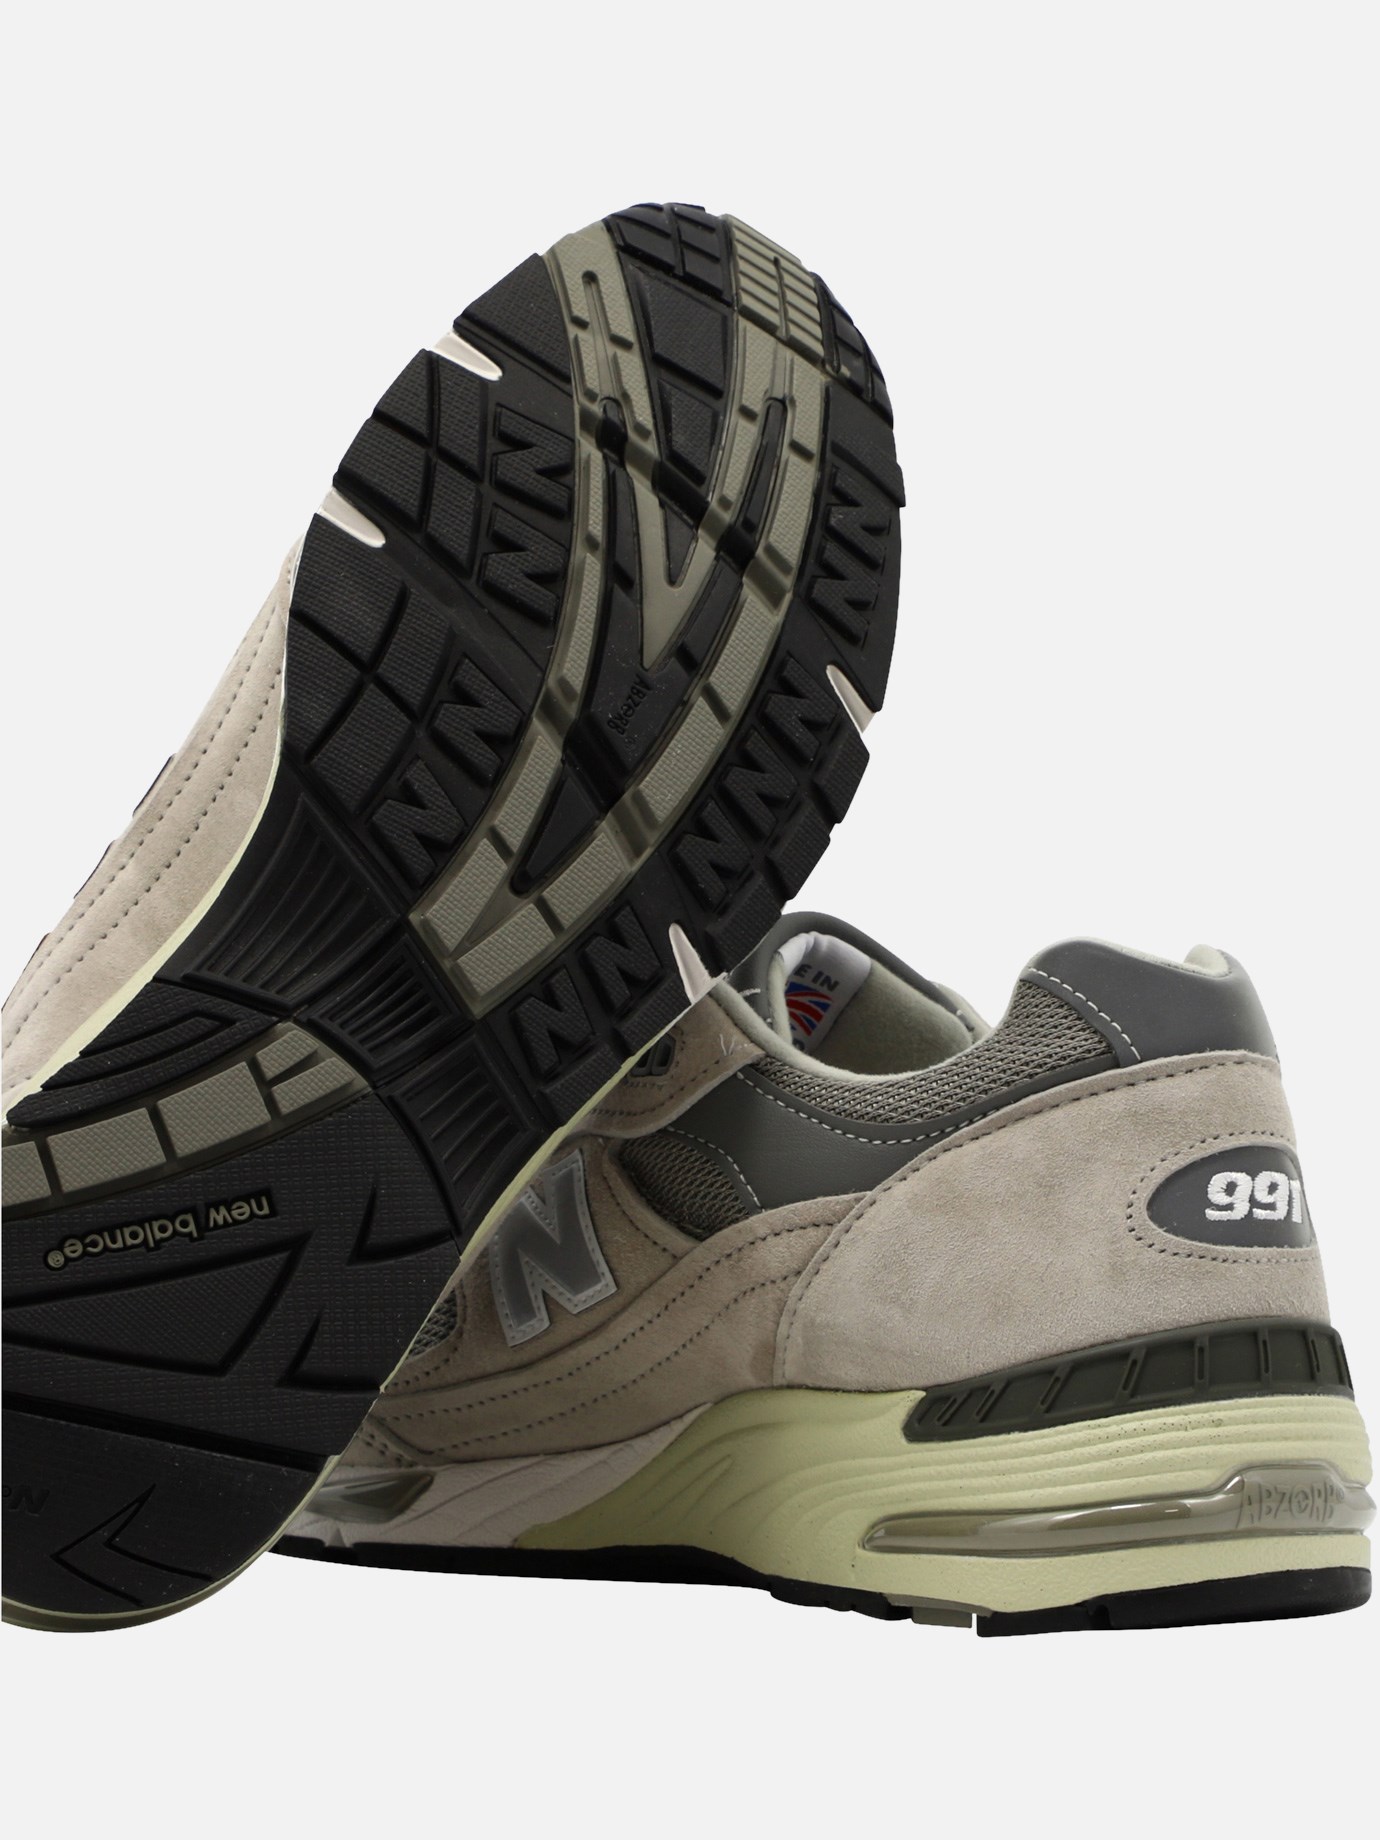  991  sneakers by New Balance